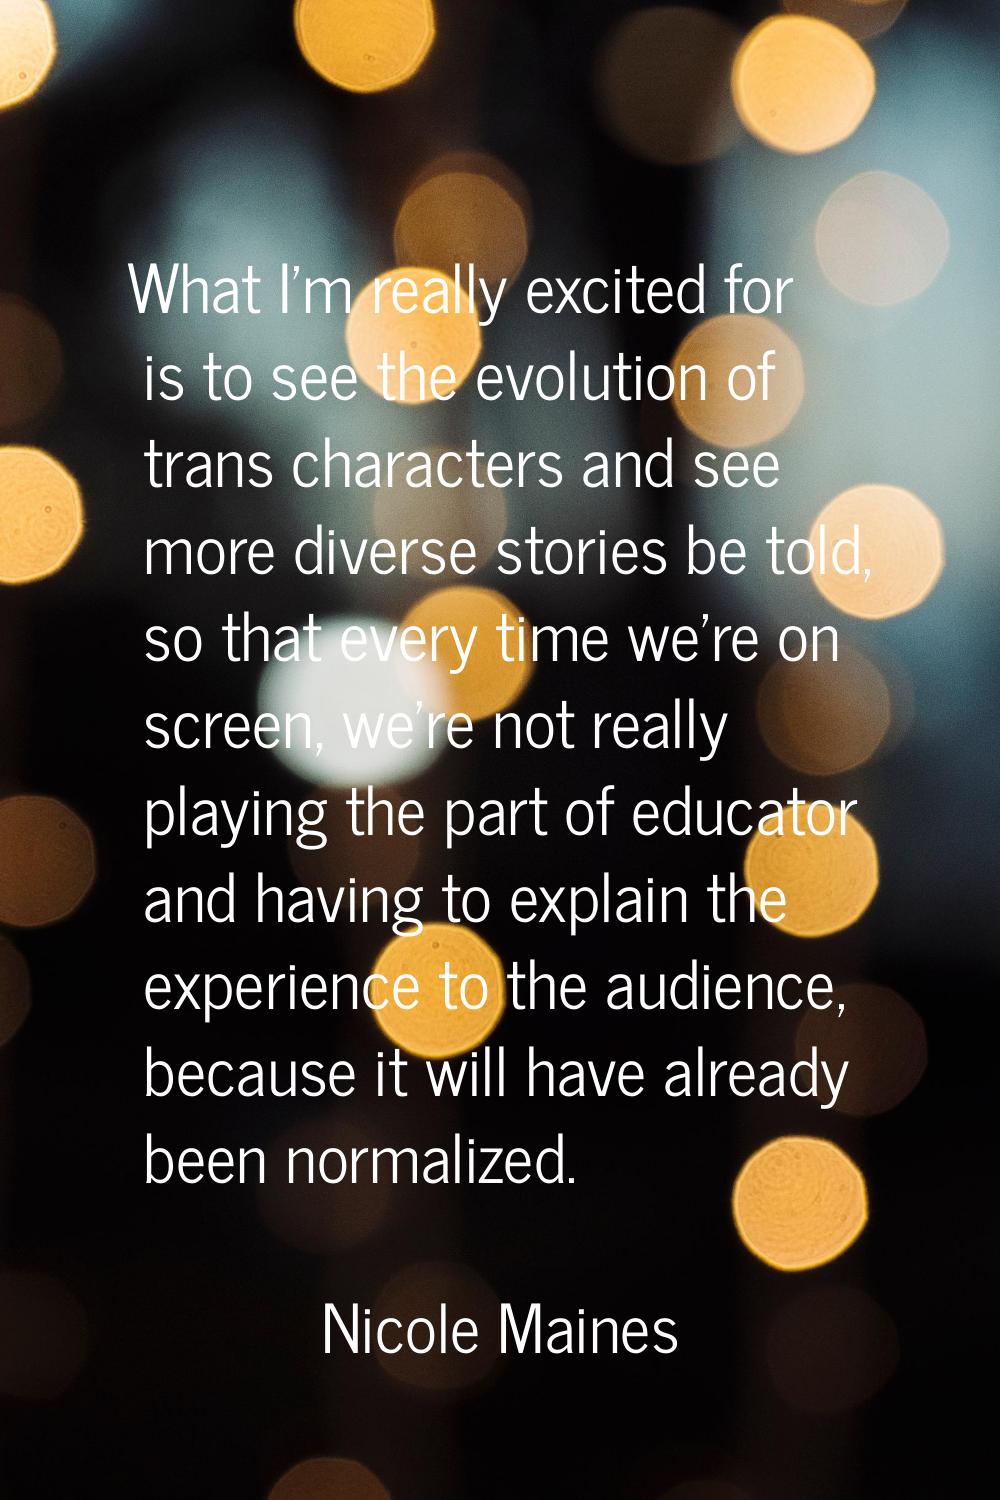 What I'm really excited for is to see the evolution of trans characters and see more diverse storie